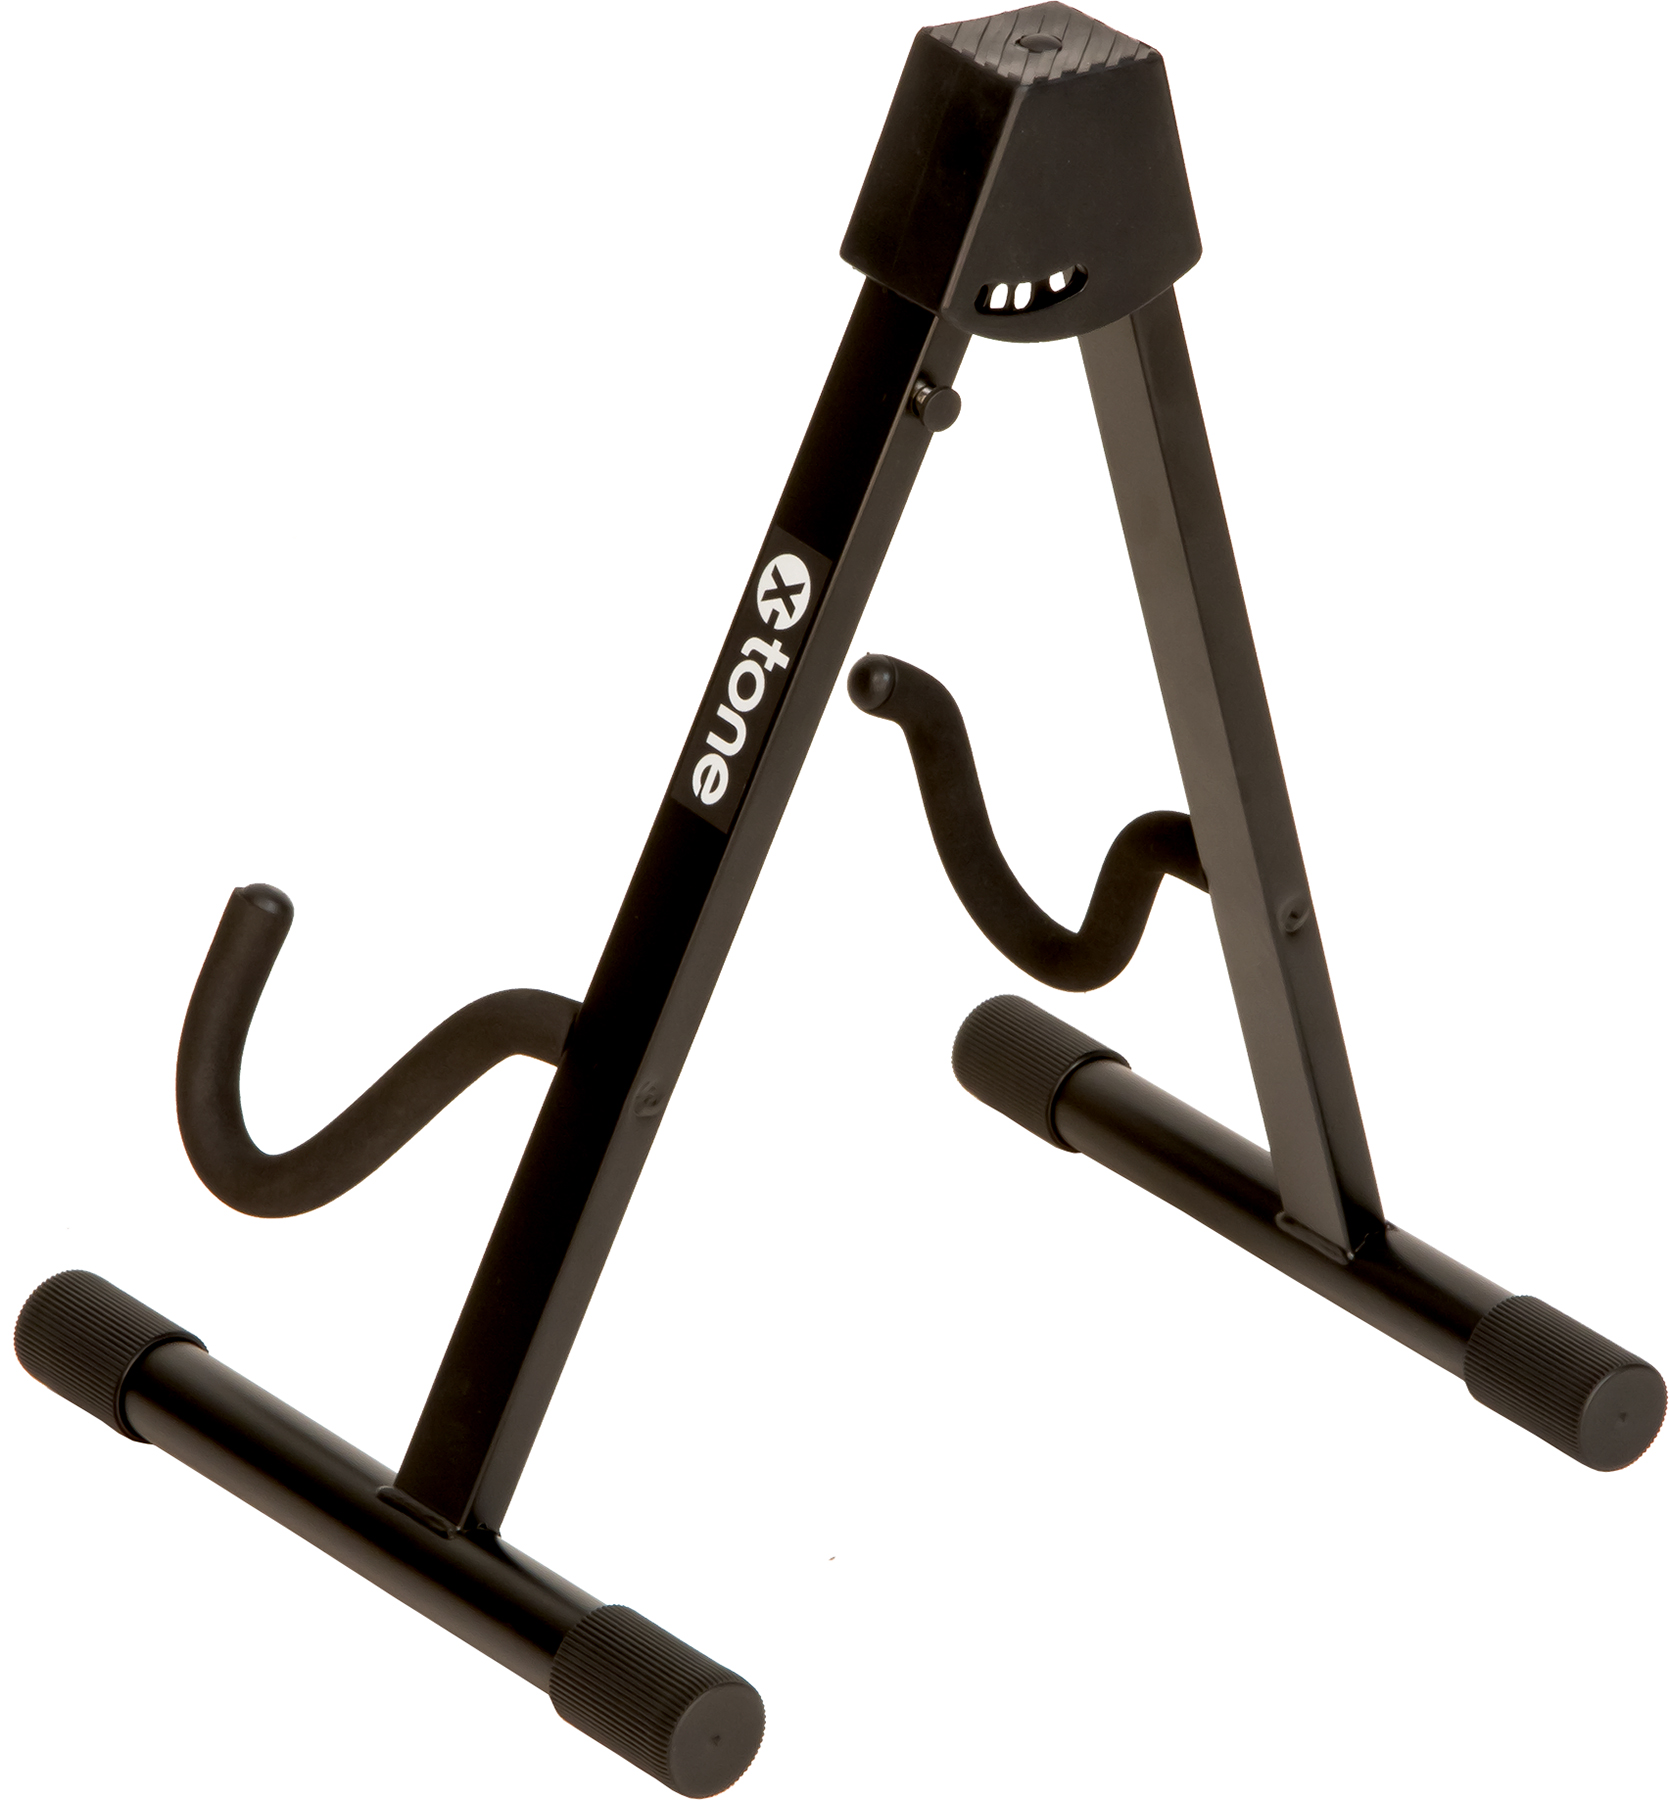 X-tone Xh 6201e Stand Guitare Electrique Sol Pliable - Stand & Support Guitare & Basse - Variation 1